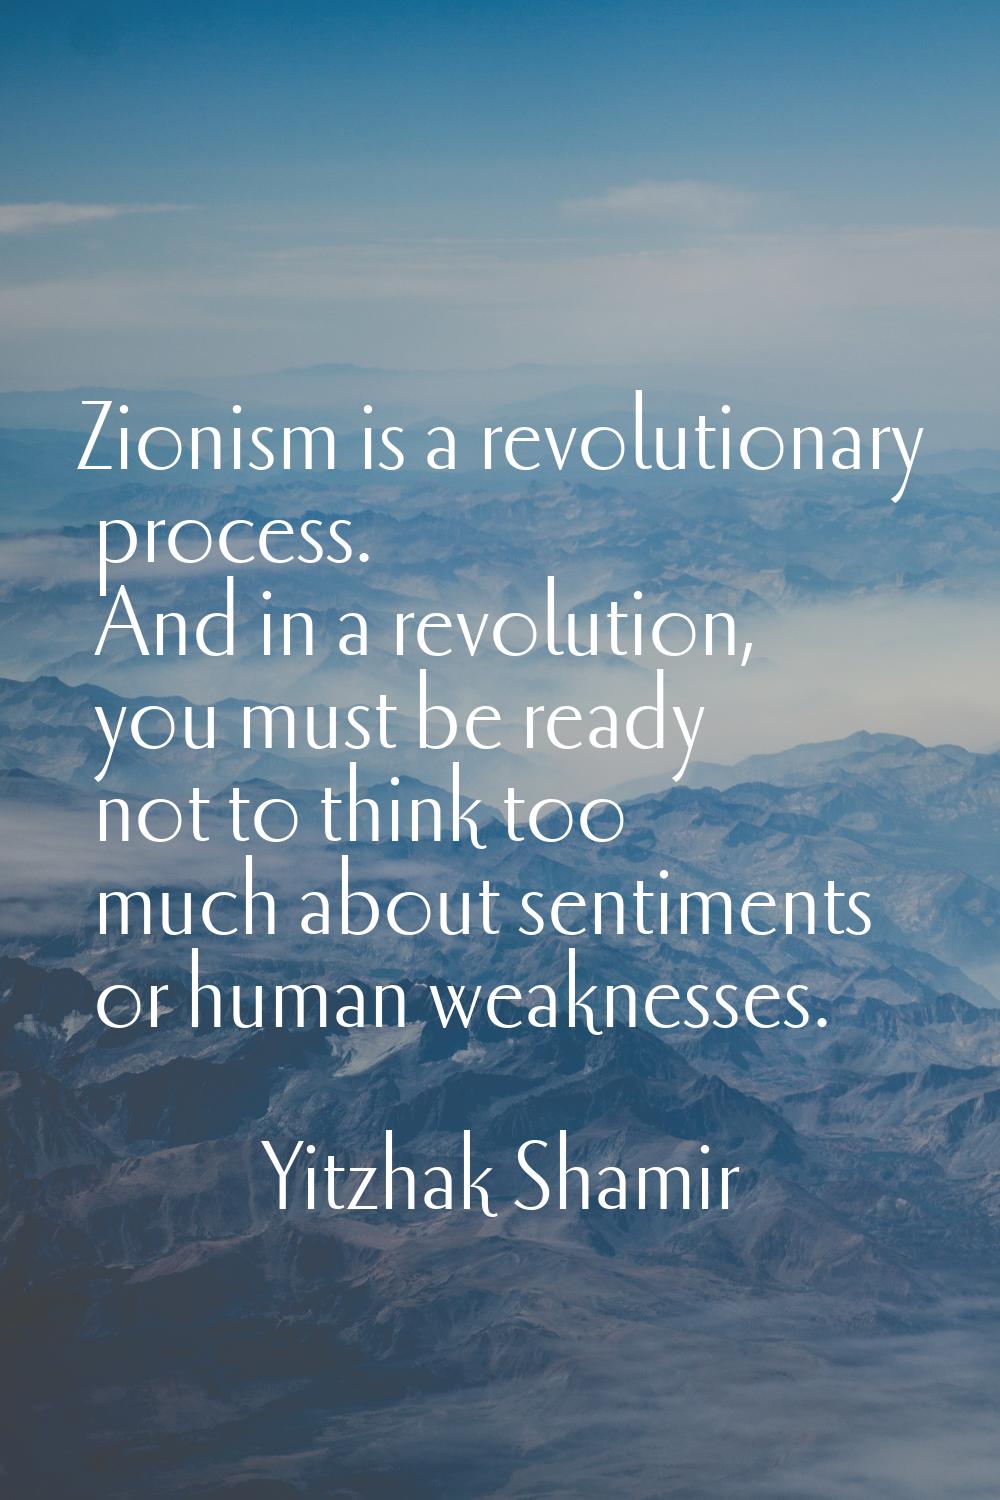 Zionism is a revolutionary process. And in a revolution, you must be ready not to think too much ab